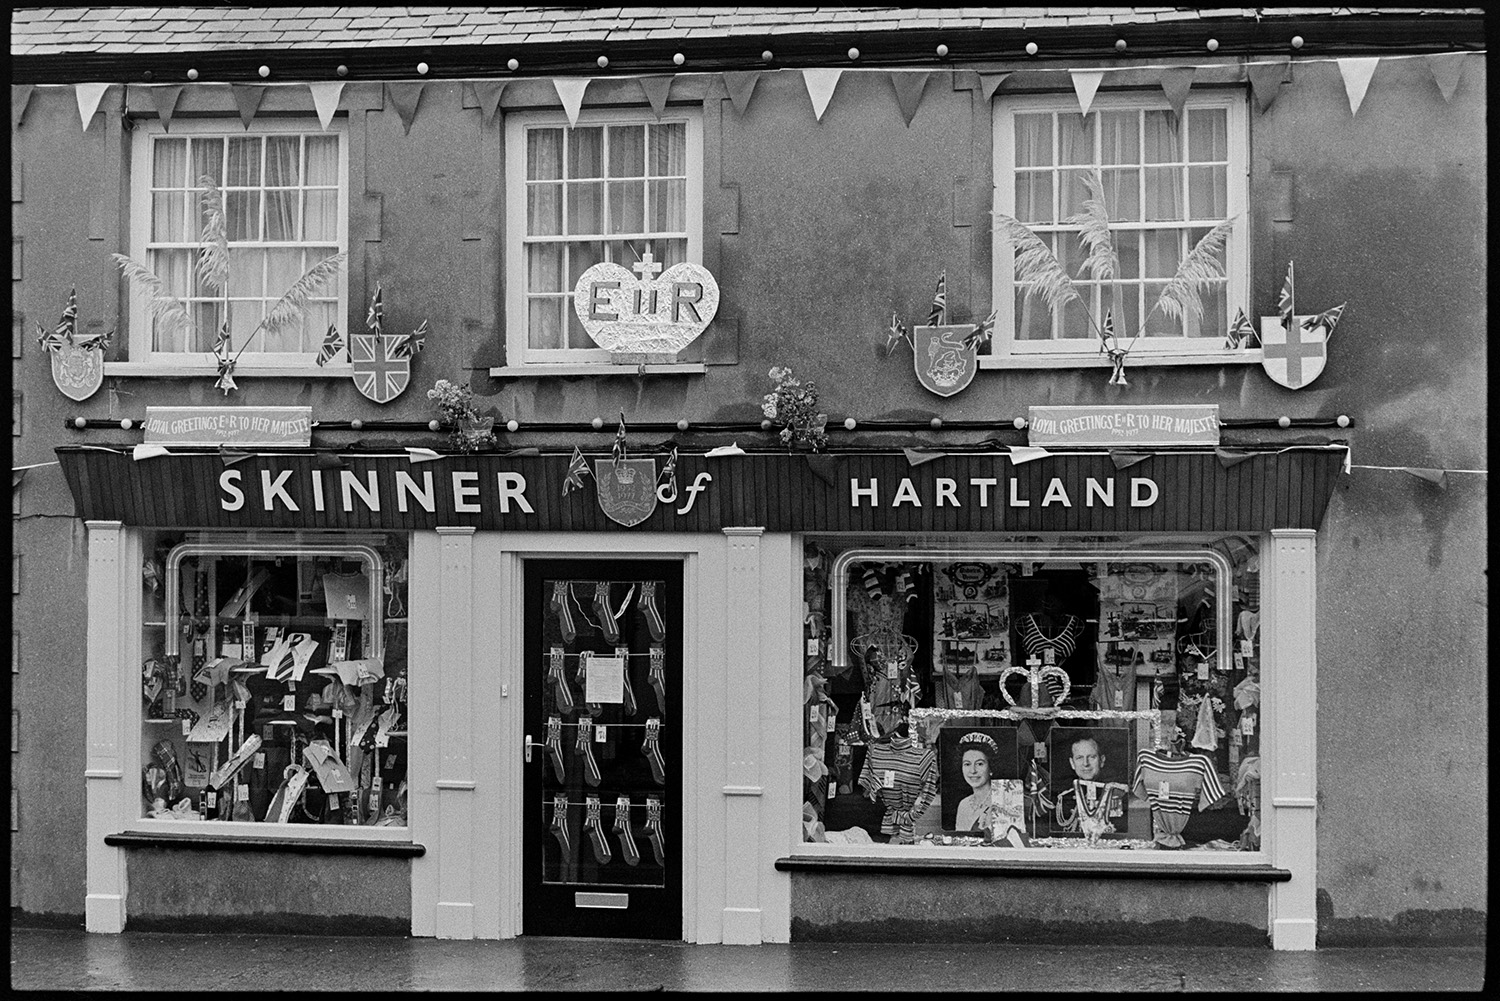 Clothes shop decorated for Jubilee, socks hanging in door.
[The shop front window of the Skinner of Hartland clothes shop in Hartland. It is decorated with Union Jack flags, crown motifs and pictures of the Queen to celebrate the Silver Jubilee of Queen Elizabeth II. Socks with a Union jack design are hung up on the front door.]